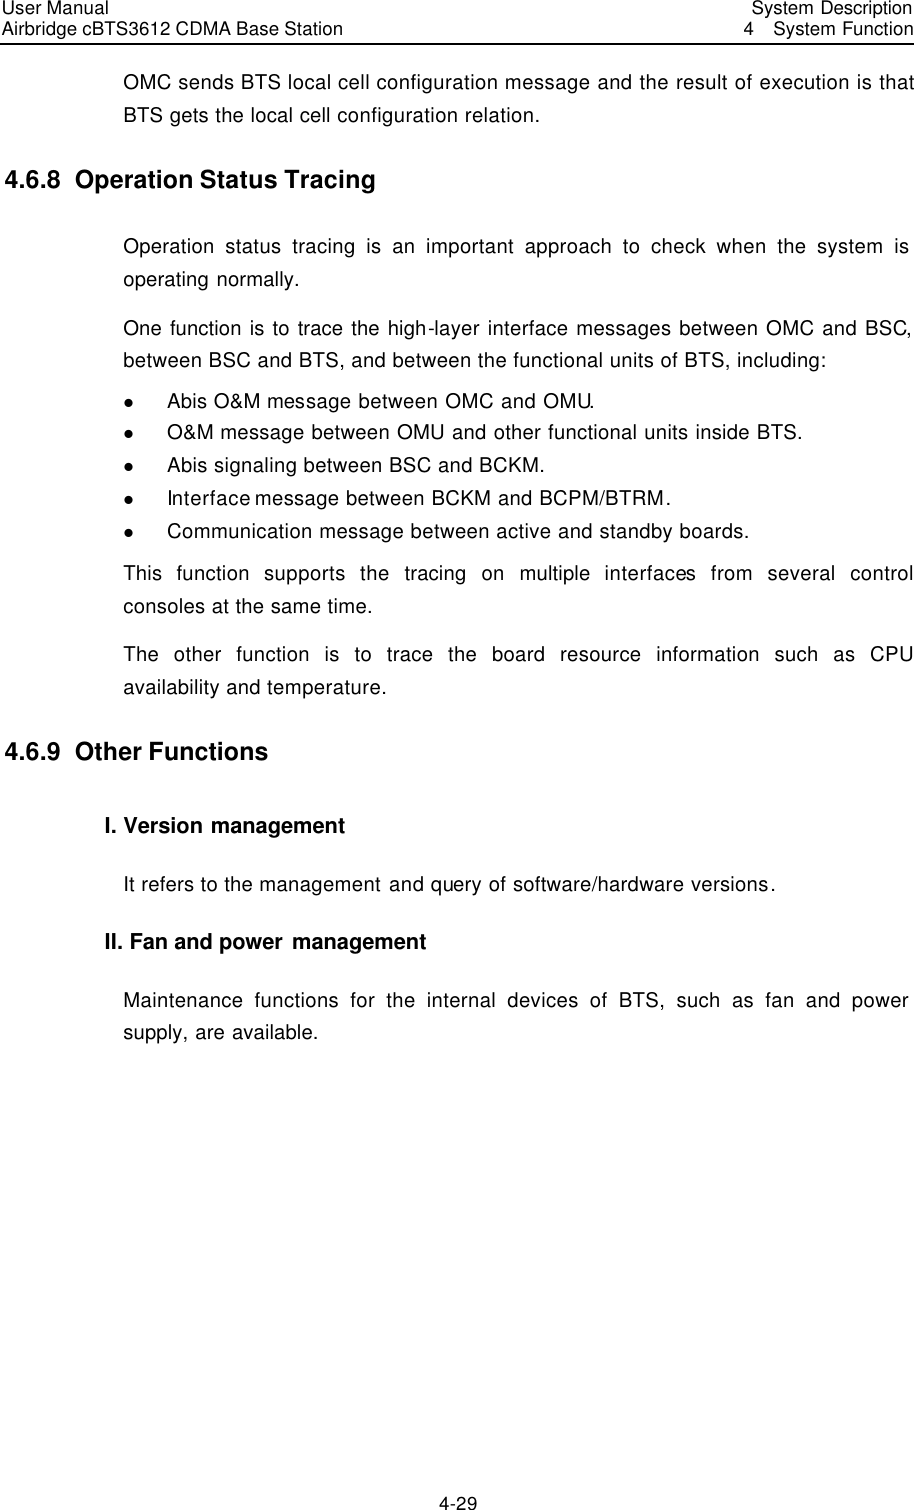 User Manual Airbridge cBTS3612 CDMA Base Station   System Description4  System Function 4-29 OMC sends BTS local cell configuration message and the result of execution is that BTS gets the local cell configuration relation.   4.6.8  Operation Status Tracing Operation status tracing is an important approach to check when the system is operating normally. One function is to trace the high-layer interface messages between OMC and BSC, between BSC and BTS, and between the functional units of BTS, including:   l Abis O&amp;M message between OMC and OMU.   l O&amp;M message between OMU and other functional units inside BTS. l Abis signaling between BSC and BCKM. l Interface message between BCKM and BCPM/BTRM.   l Communication message between active and standby boards. This  function supports the tracing on multiple interfaces from several control consoles at the same time.   The other function is to trace the board resource information such as CPU availability and temperature.   4.6.9  Other Functions I. Version management It refers to the management and query of software/hardware versions.   II. Fan and power management Maintenance functions for the internal devices of BTS, such as fan and power supply, are available.  